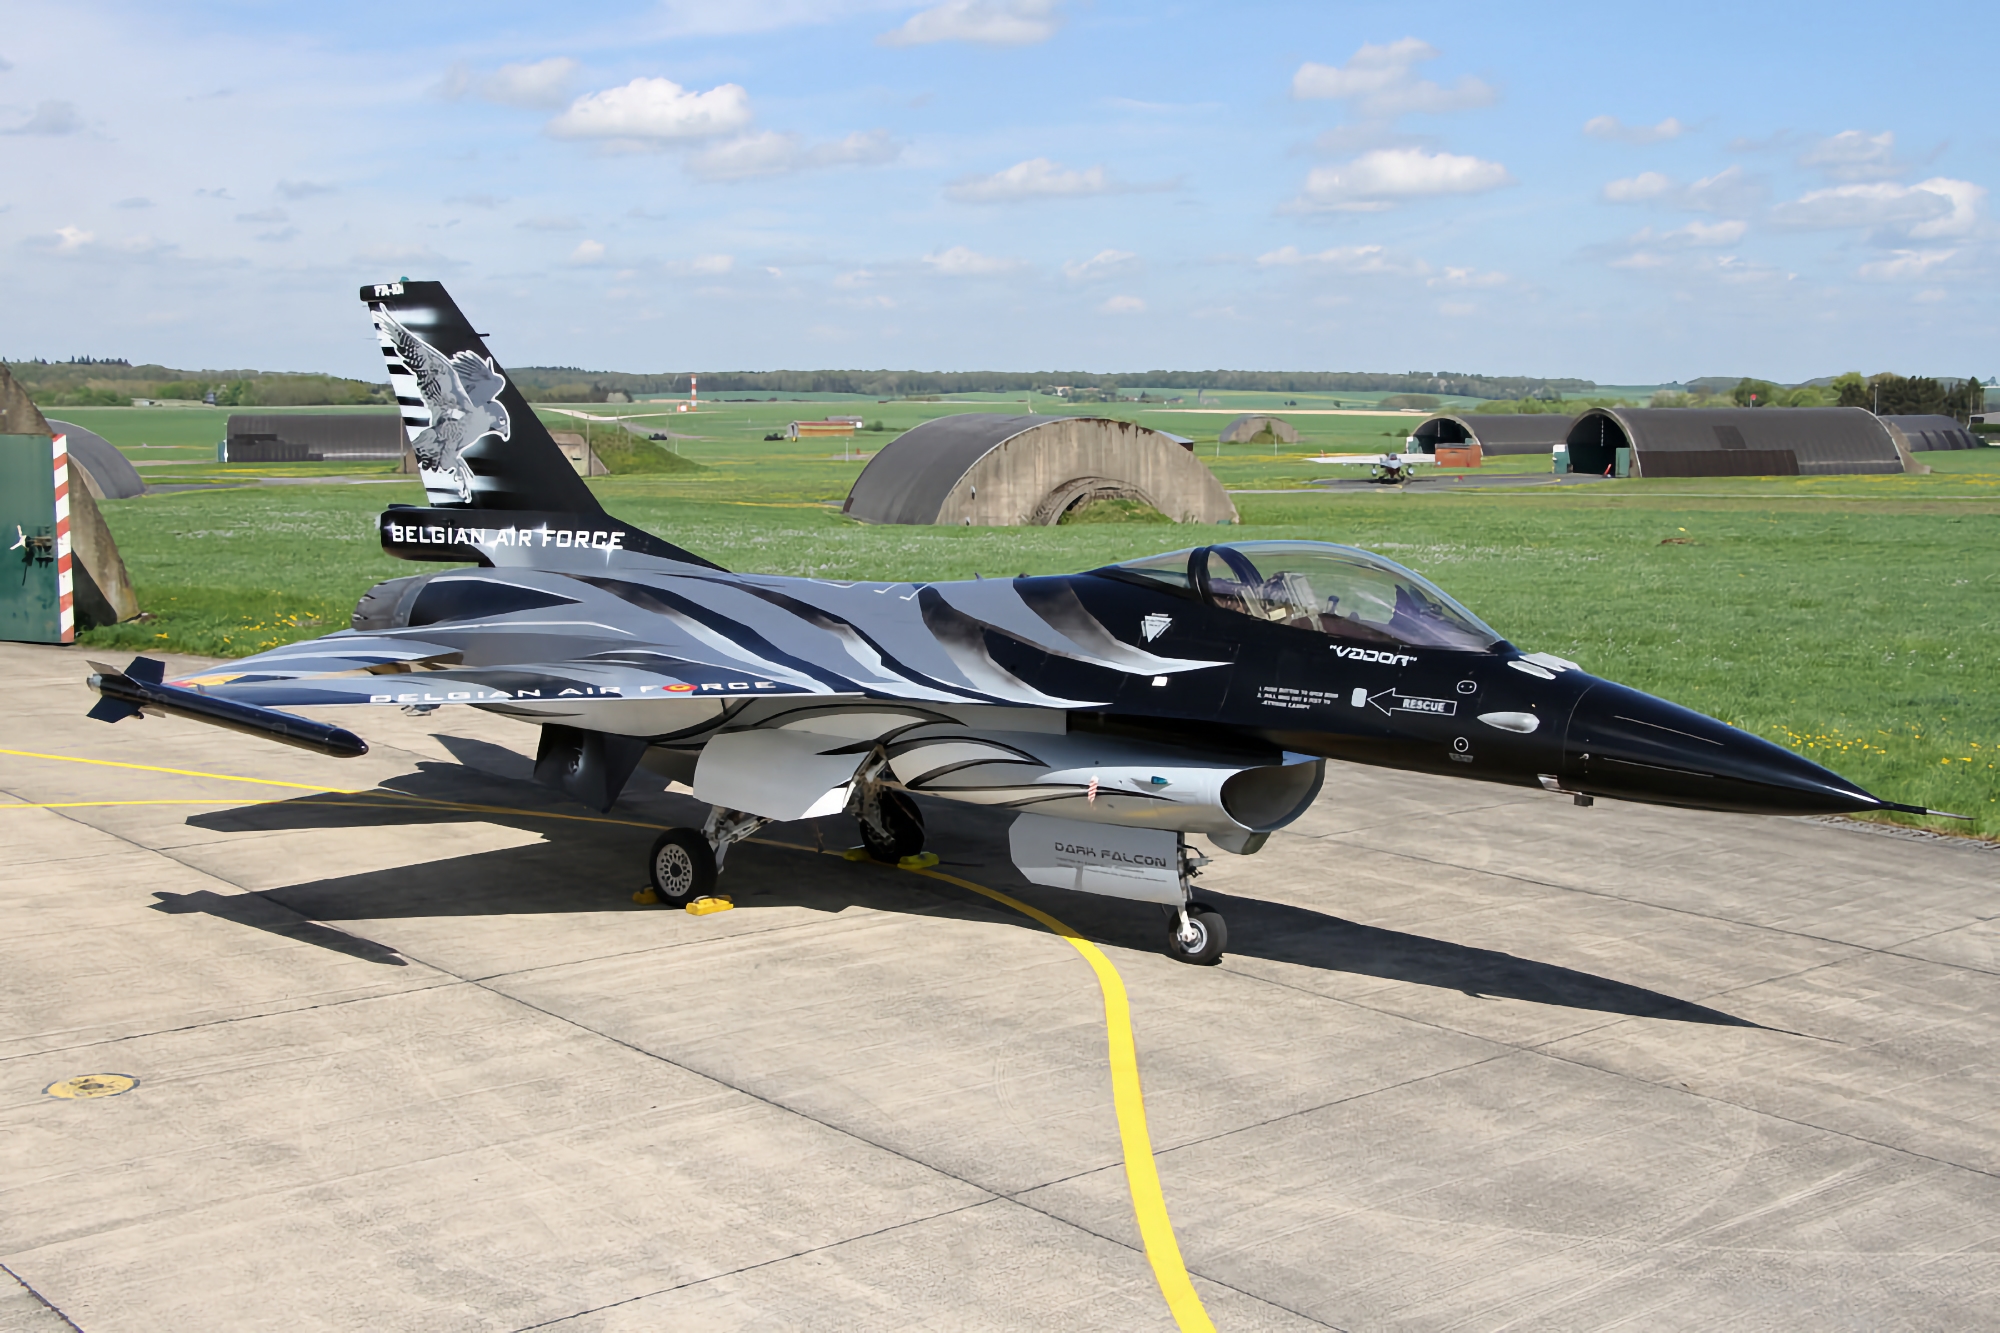 Not just the Netherlands, Denmark and Norway: Belgium will also hand over F-16 Fighting Falcon fighters to Ukraine, but as soon as it receives F-35 Lightning IIs